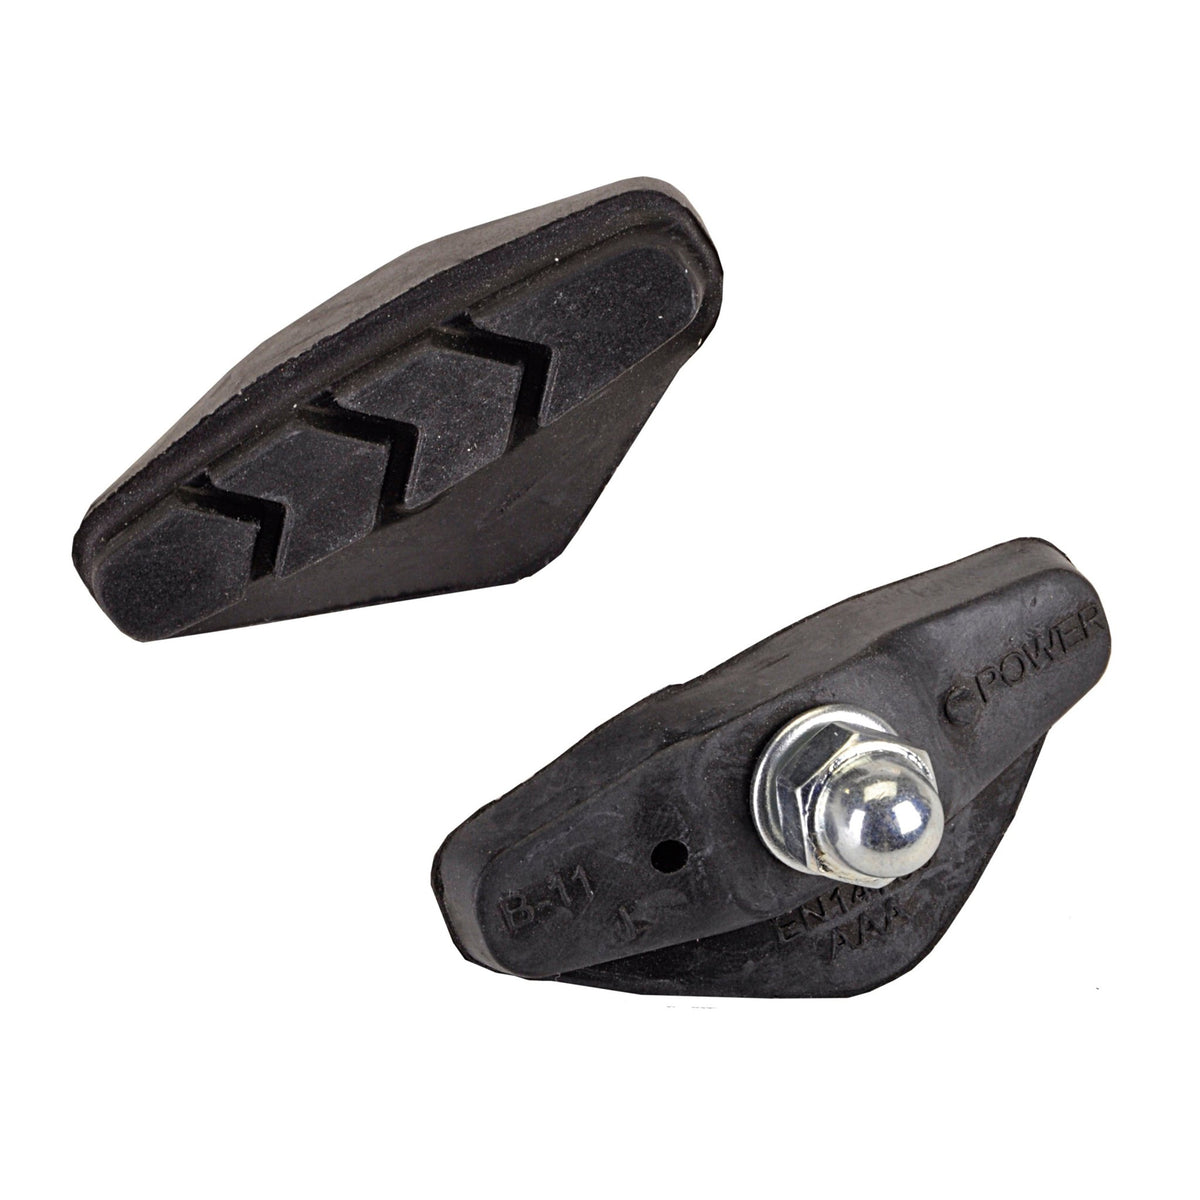 Capstone Deluxe Brake Pads | Fits Most Bikes